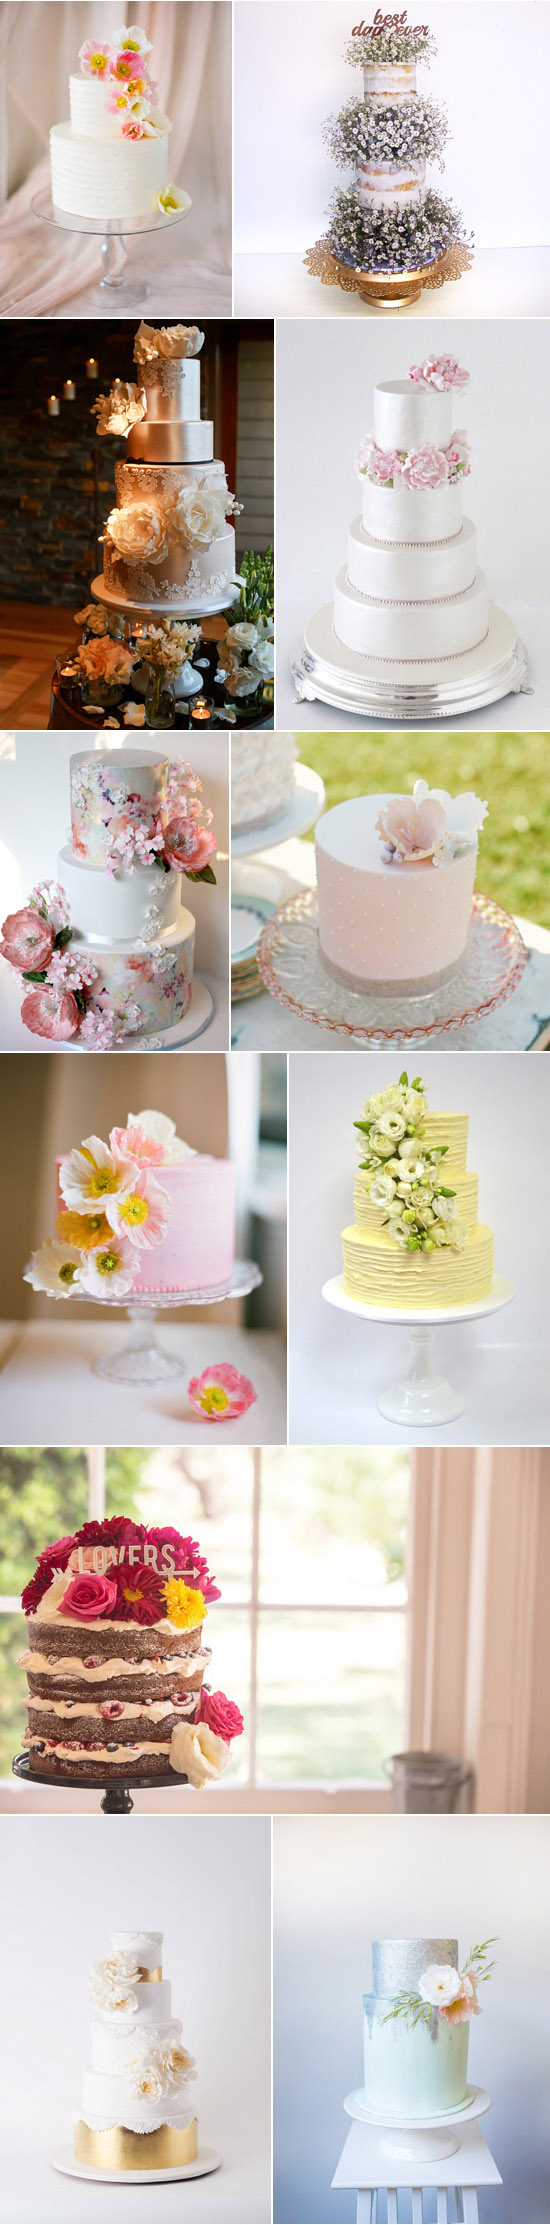 Spring Cakes For Weddings